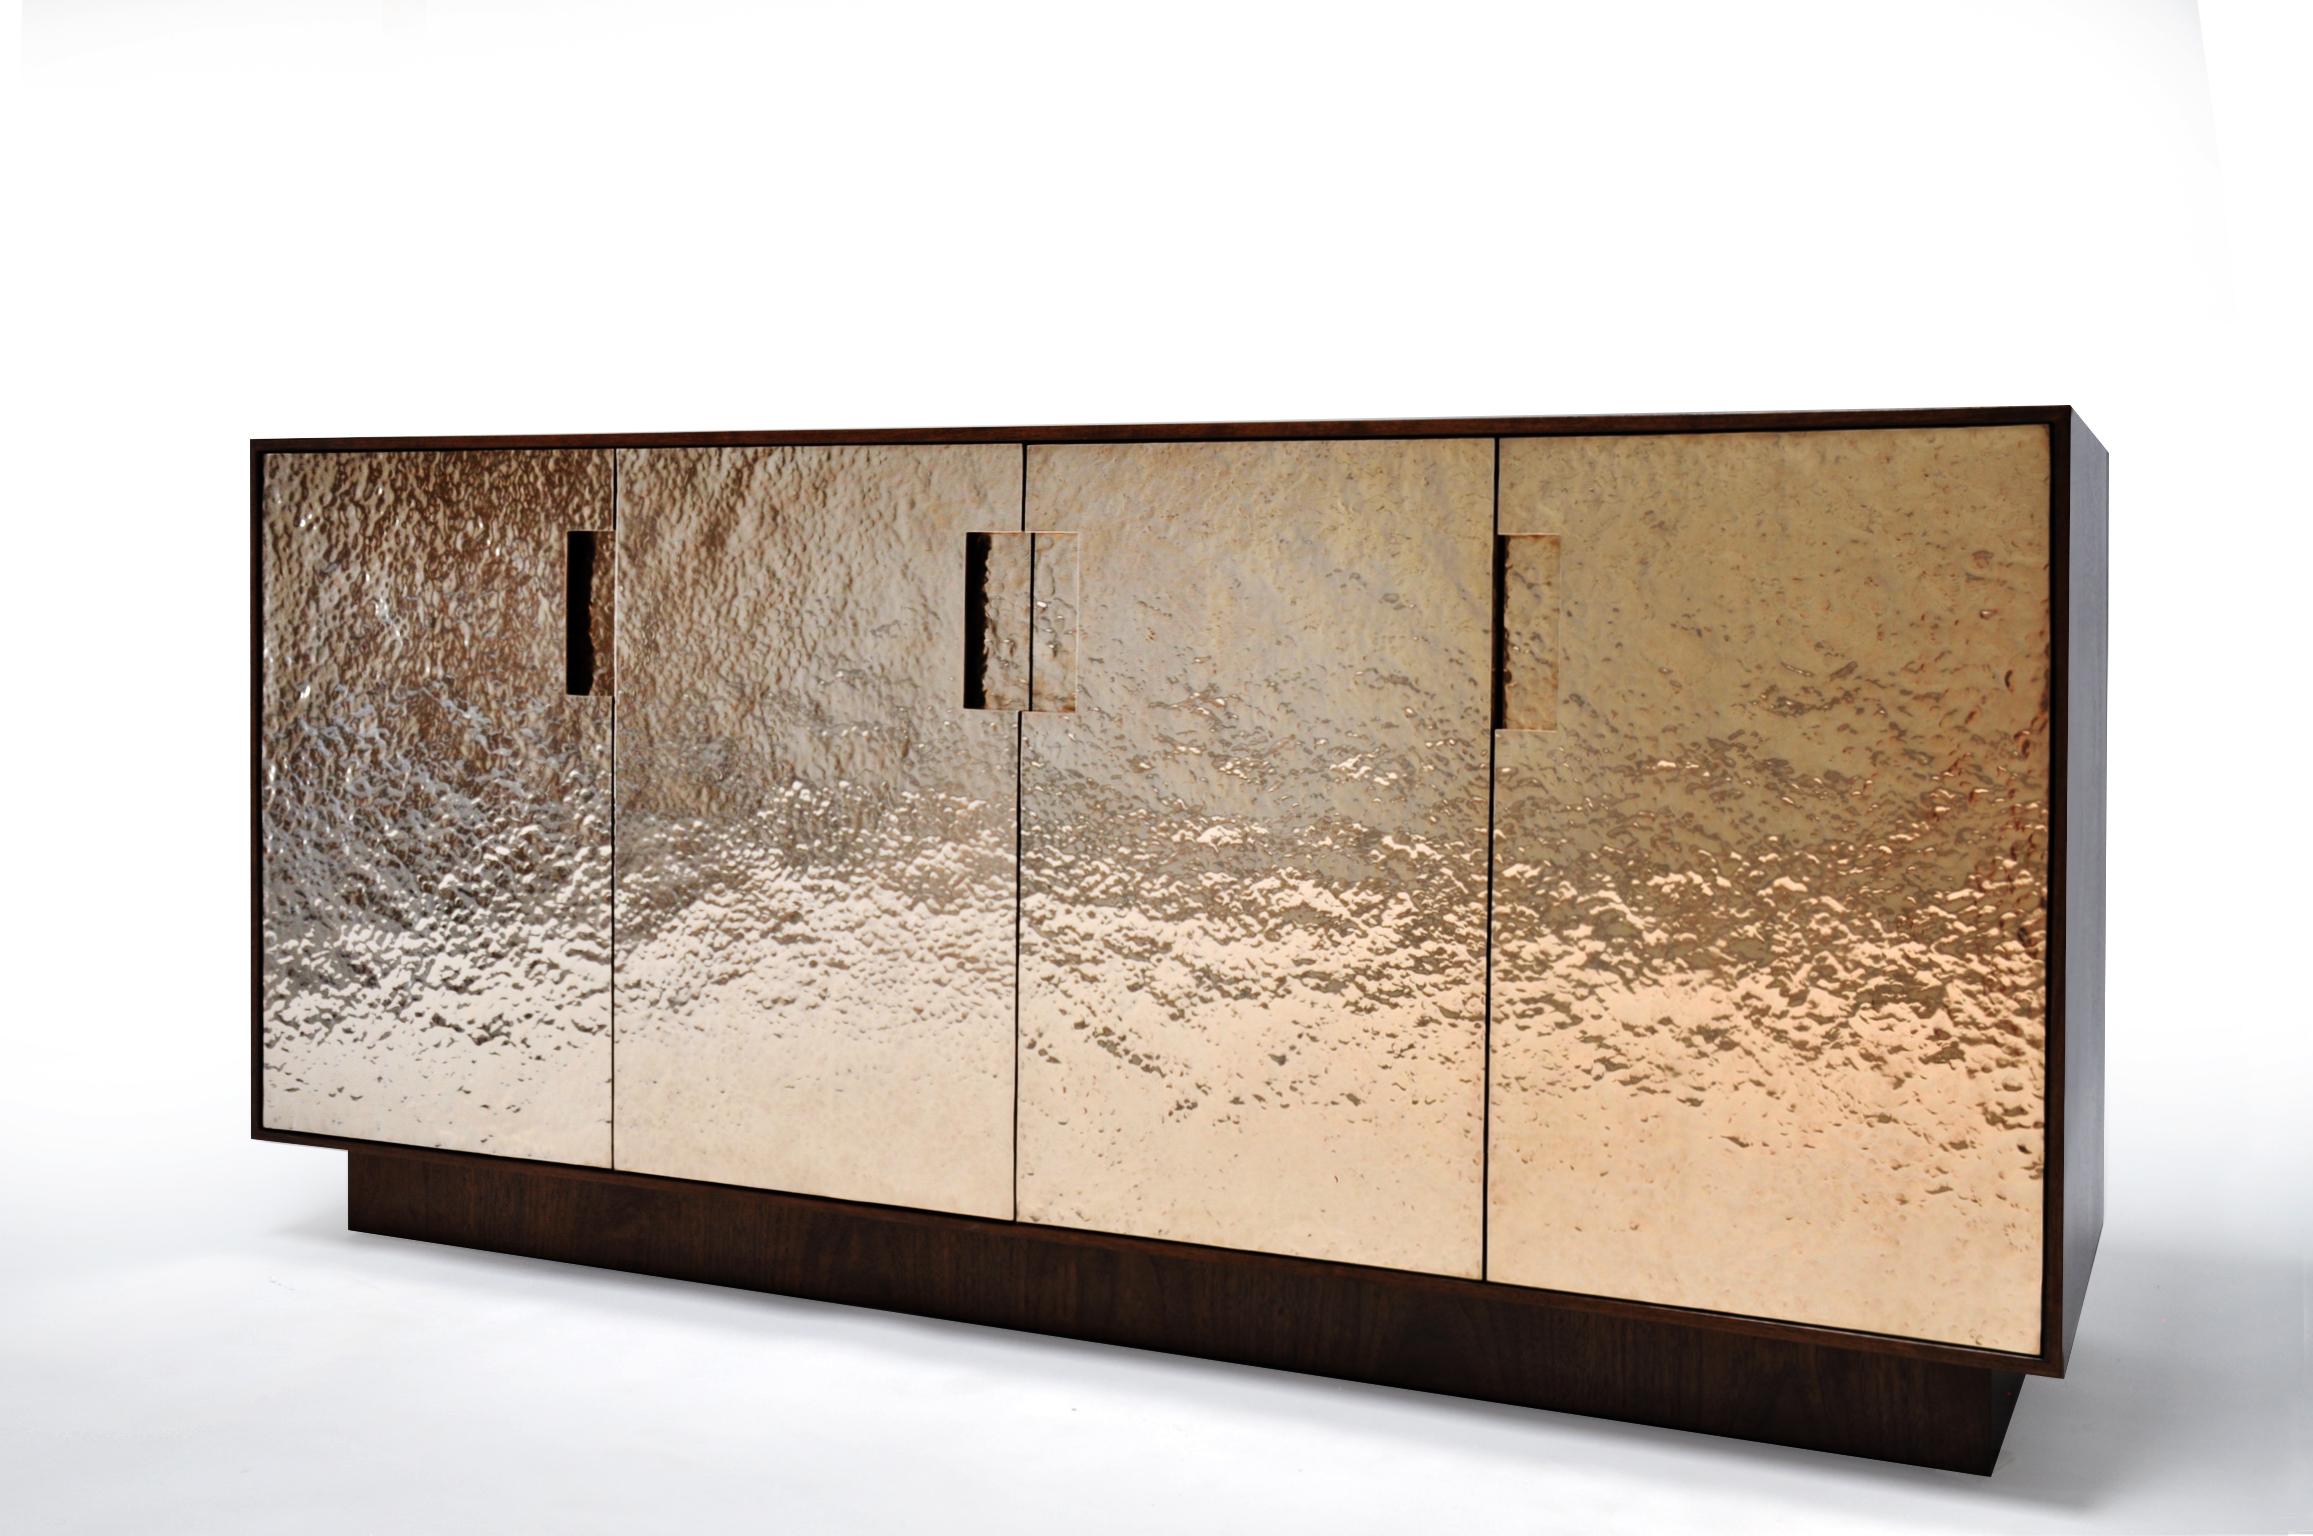 Pacifica cabinet in hammered bronze and walnut. Beautiful cabinet in luxurious Claro Walnut and hand hammered bronze doors.
Hand hammered bronze is a laborious process where the metalworker strikes bronze sheet thousands of times with a polished